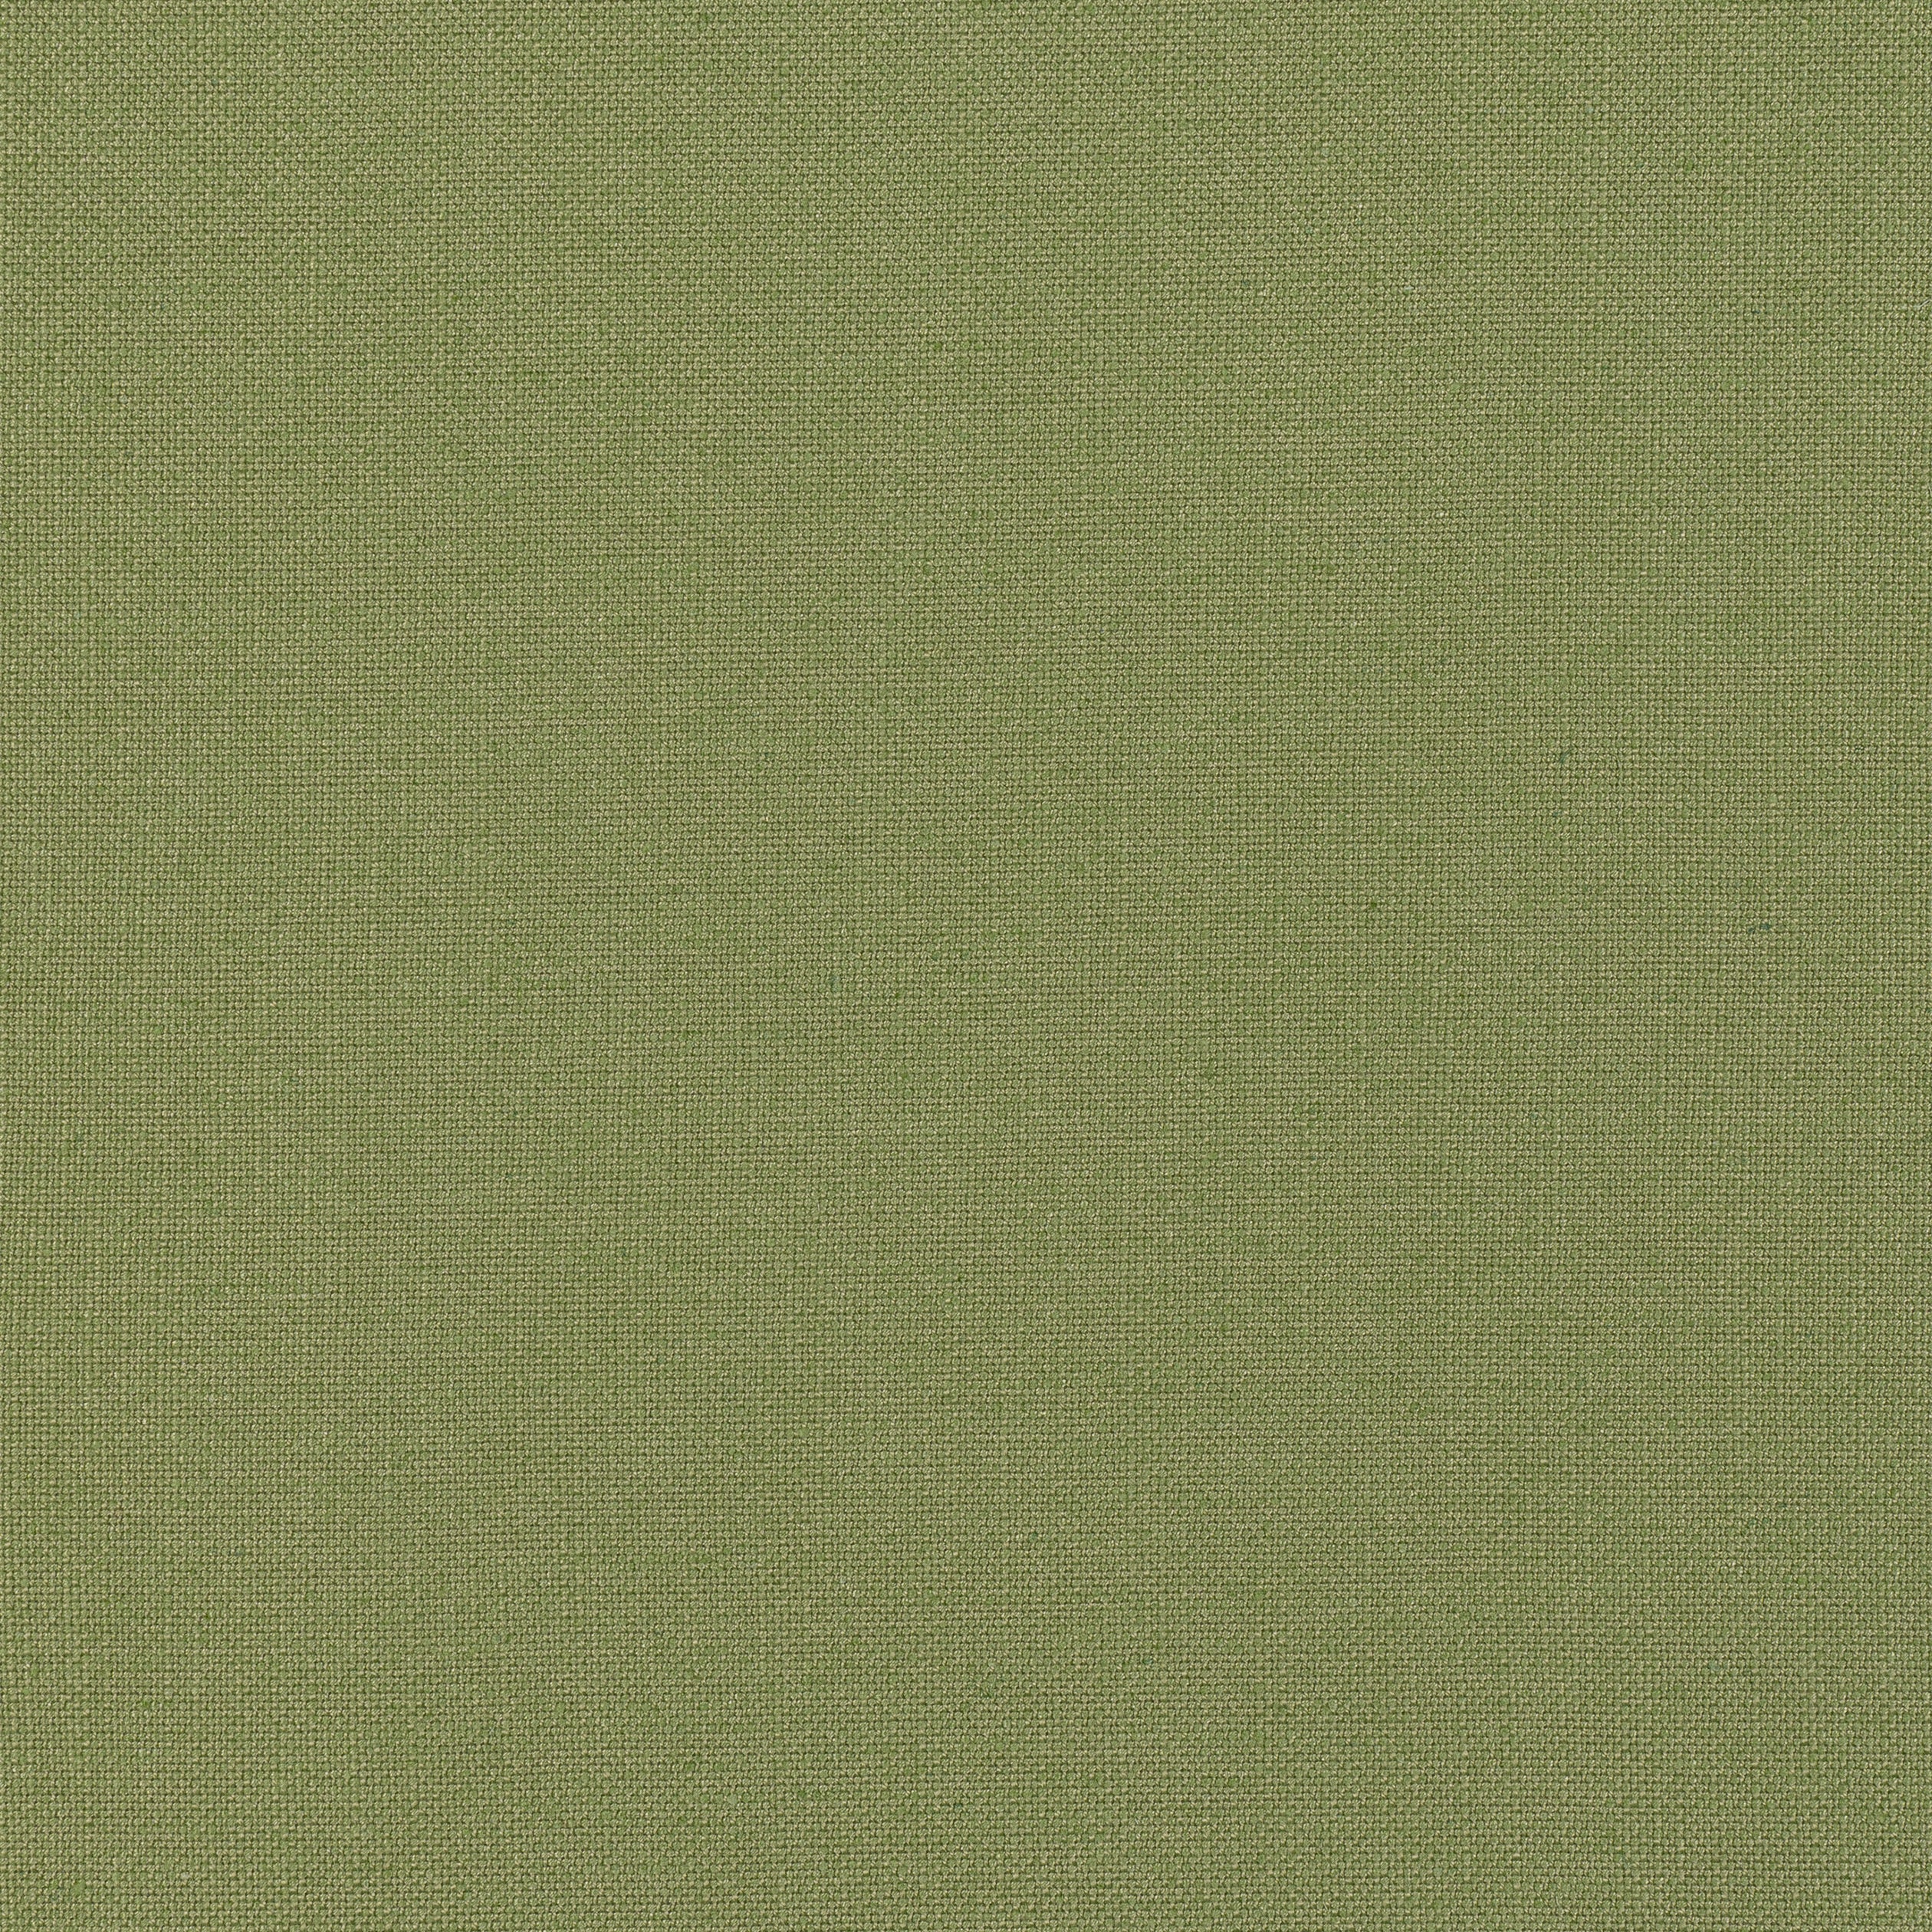 Palisade Linen fabric in olive color - pattern number FWW7657 - by Thibaut in the Palisades collection